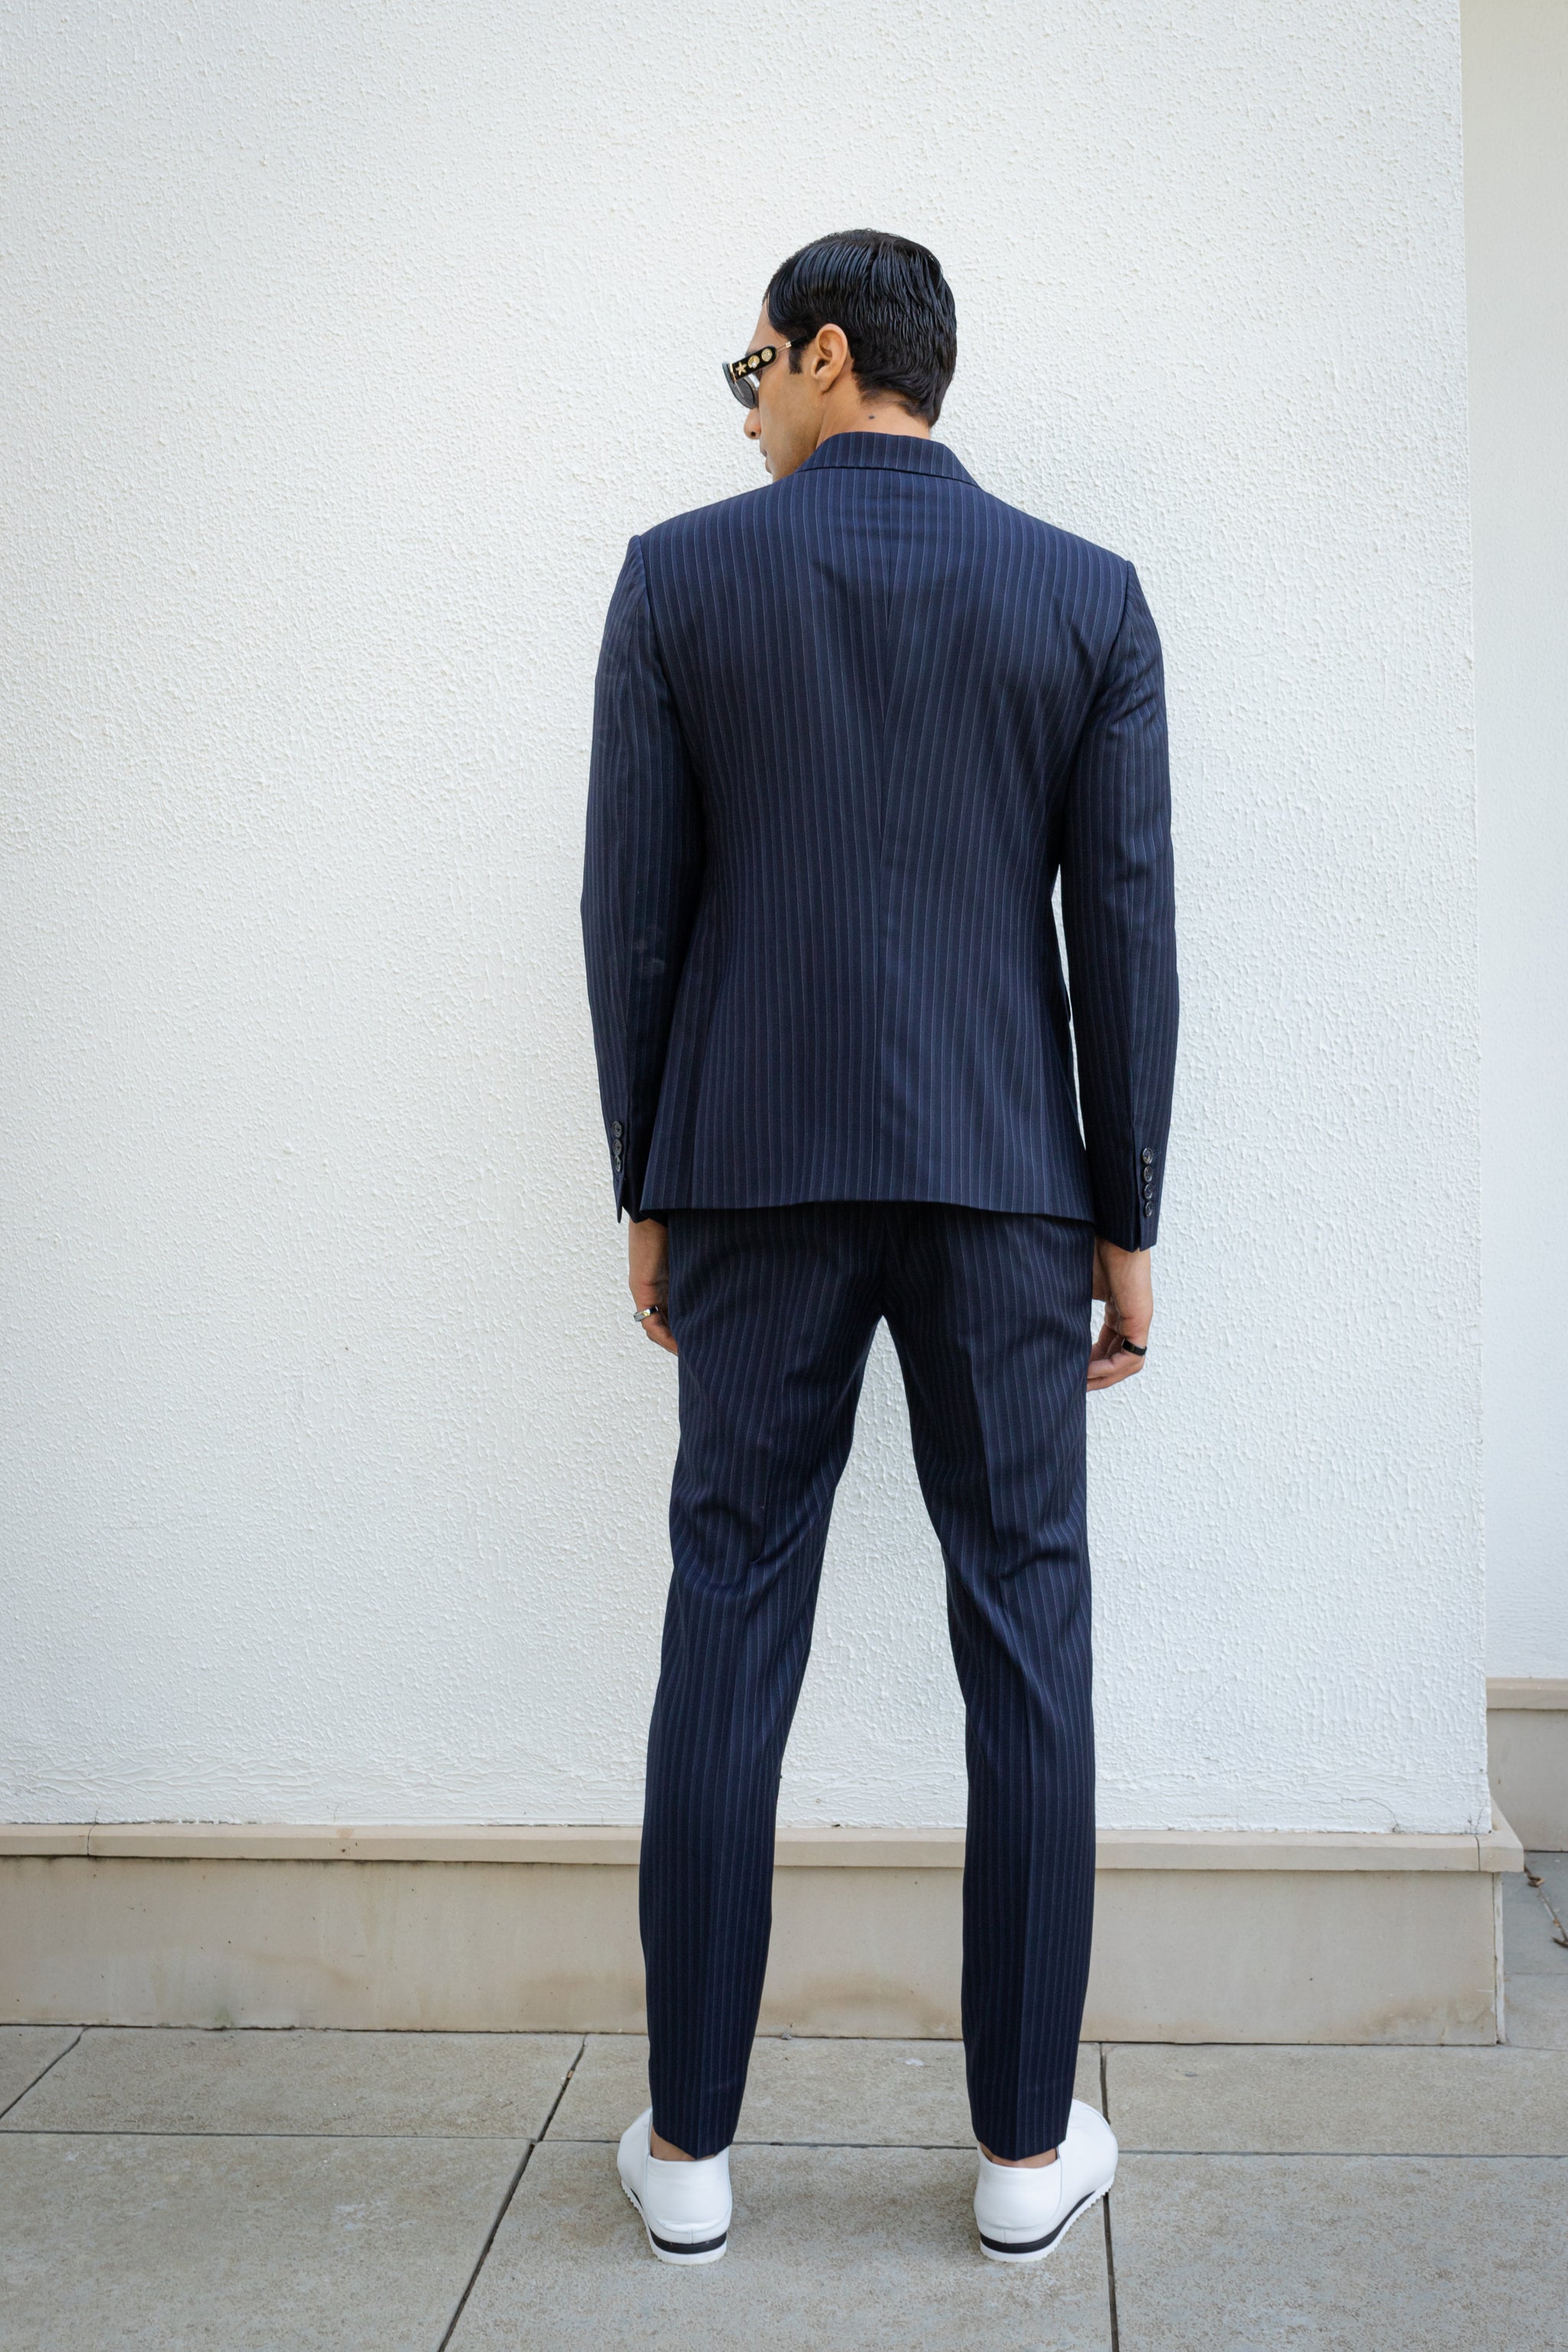 Classic Navy Blue Suit With White Bands.